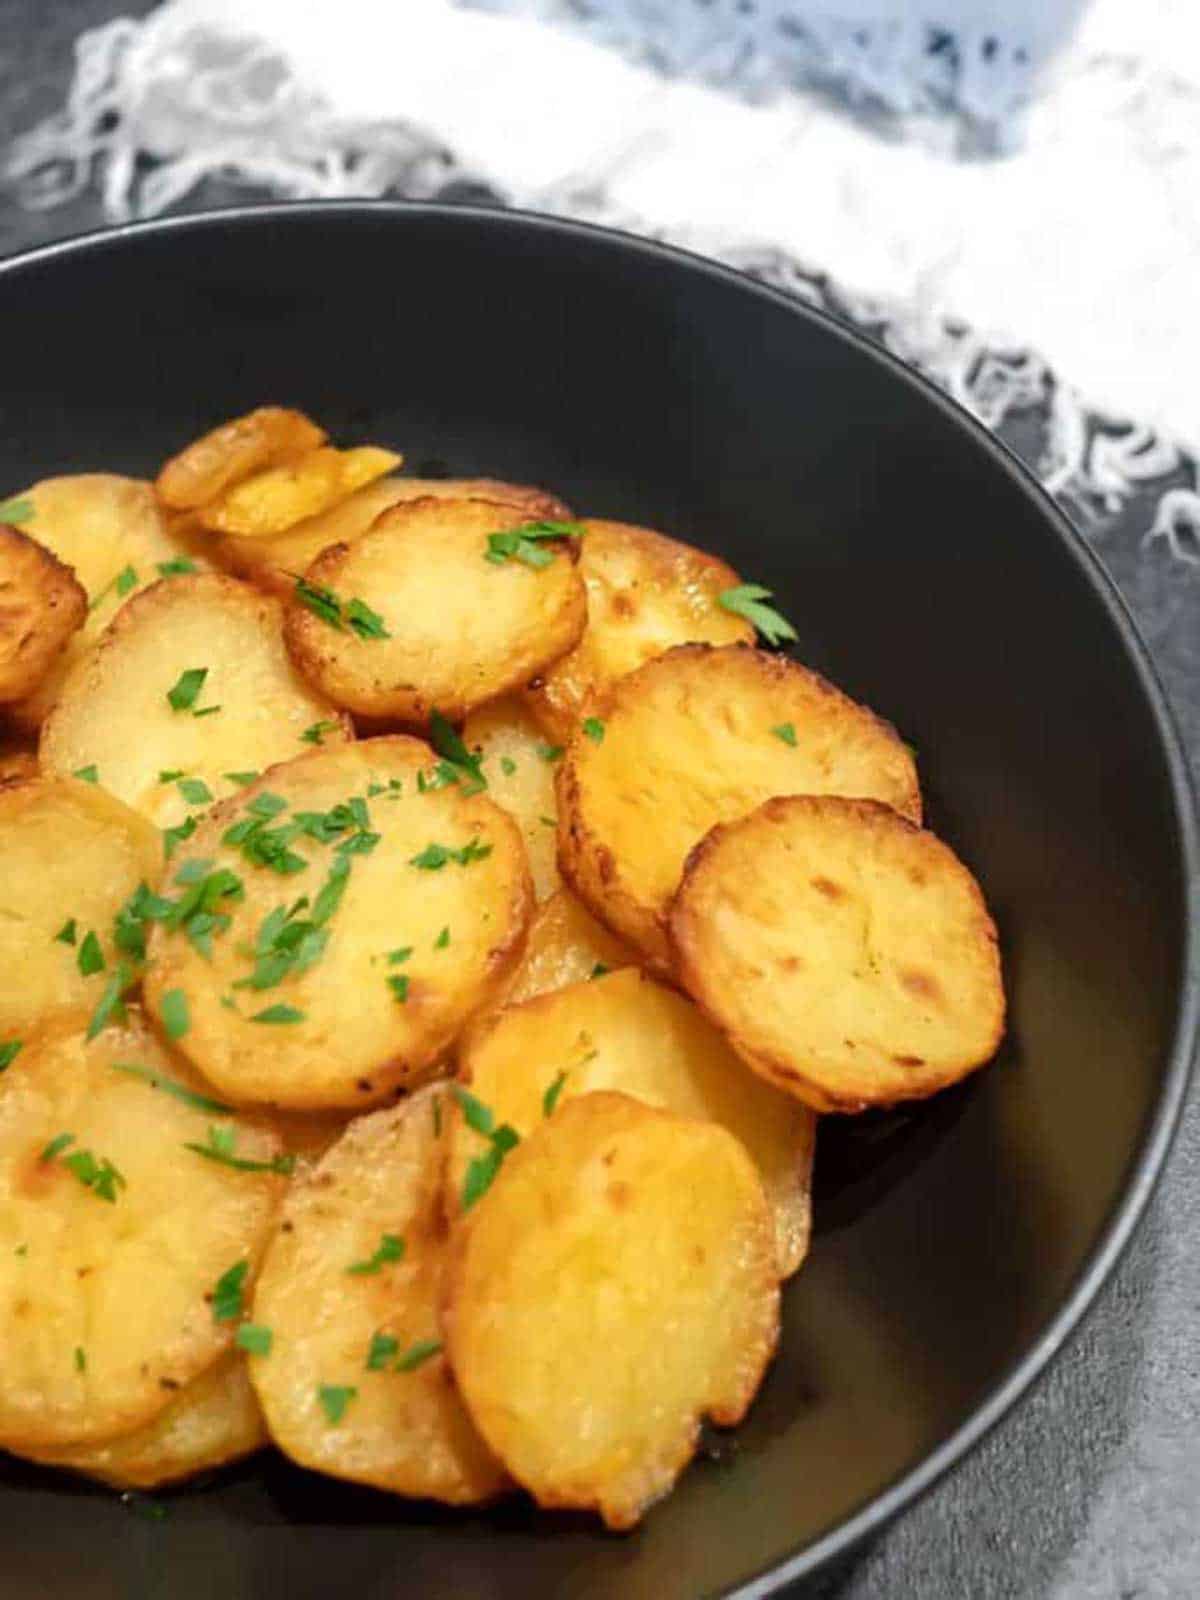 Oven-roasted potatoes in a black bowl.